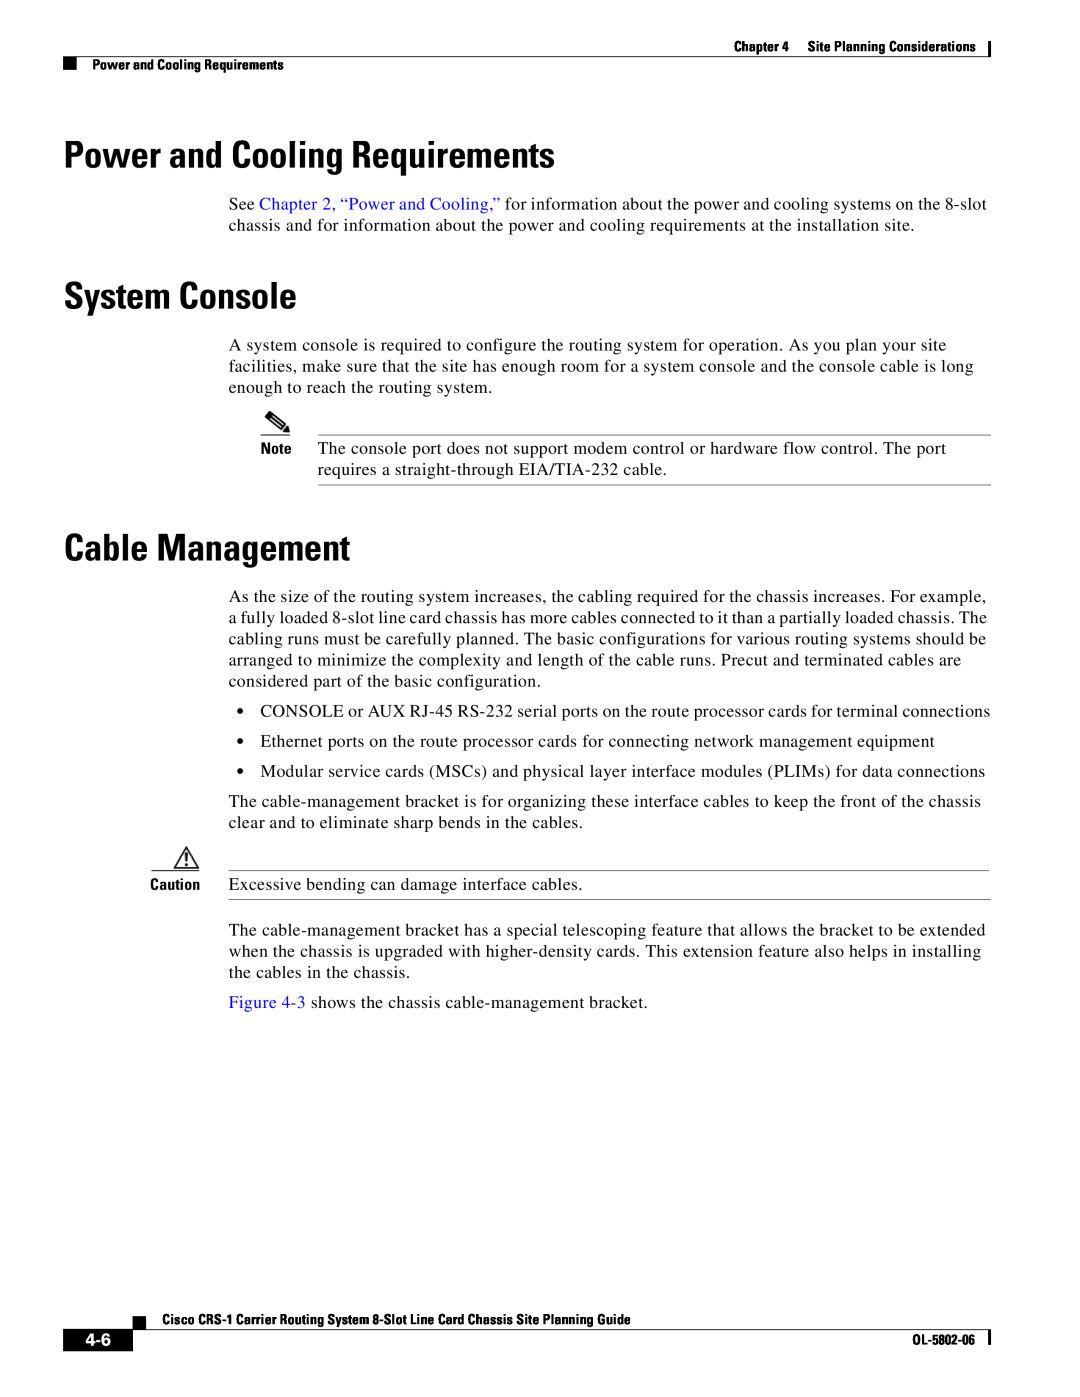 Cisco Systems CRS-1 manual Power and Cooling Requirements, System Console, Cable Management 